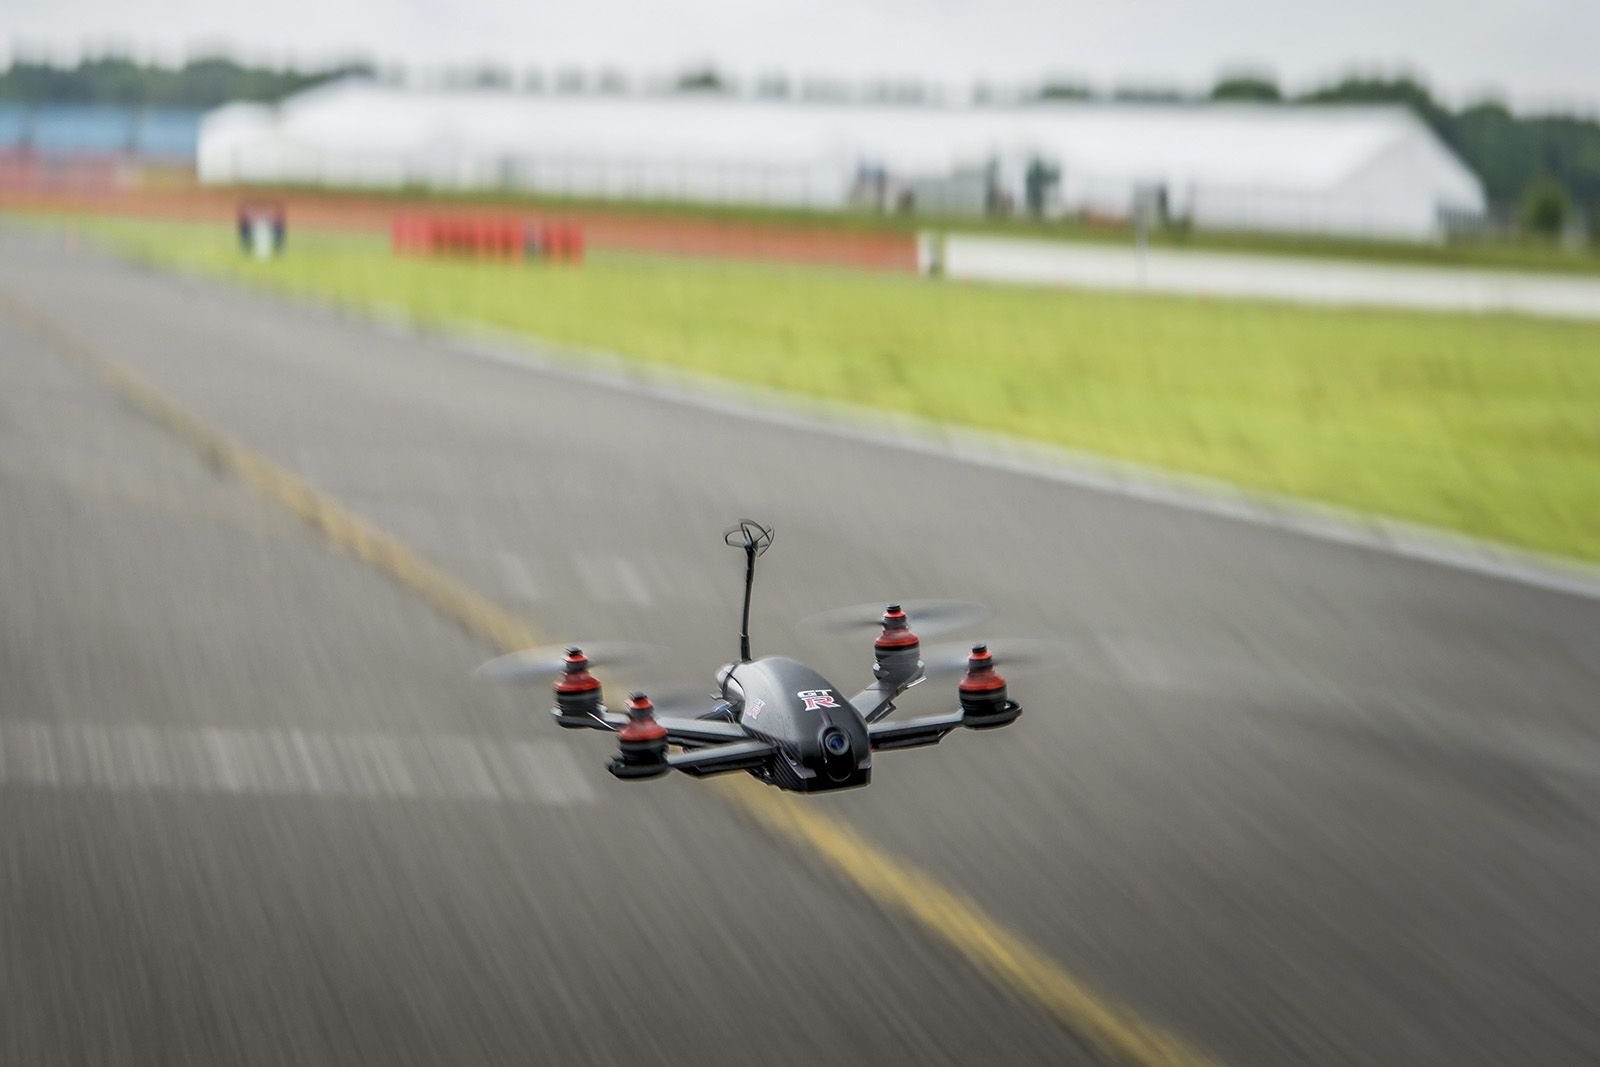 nissan drone can go 115mph watch it race the 2017 nissan gt r image 2